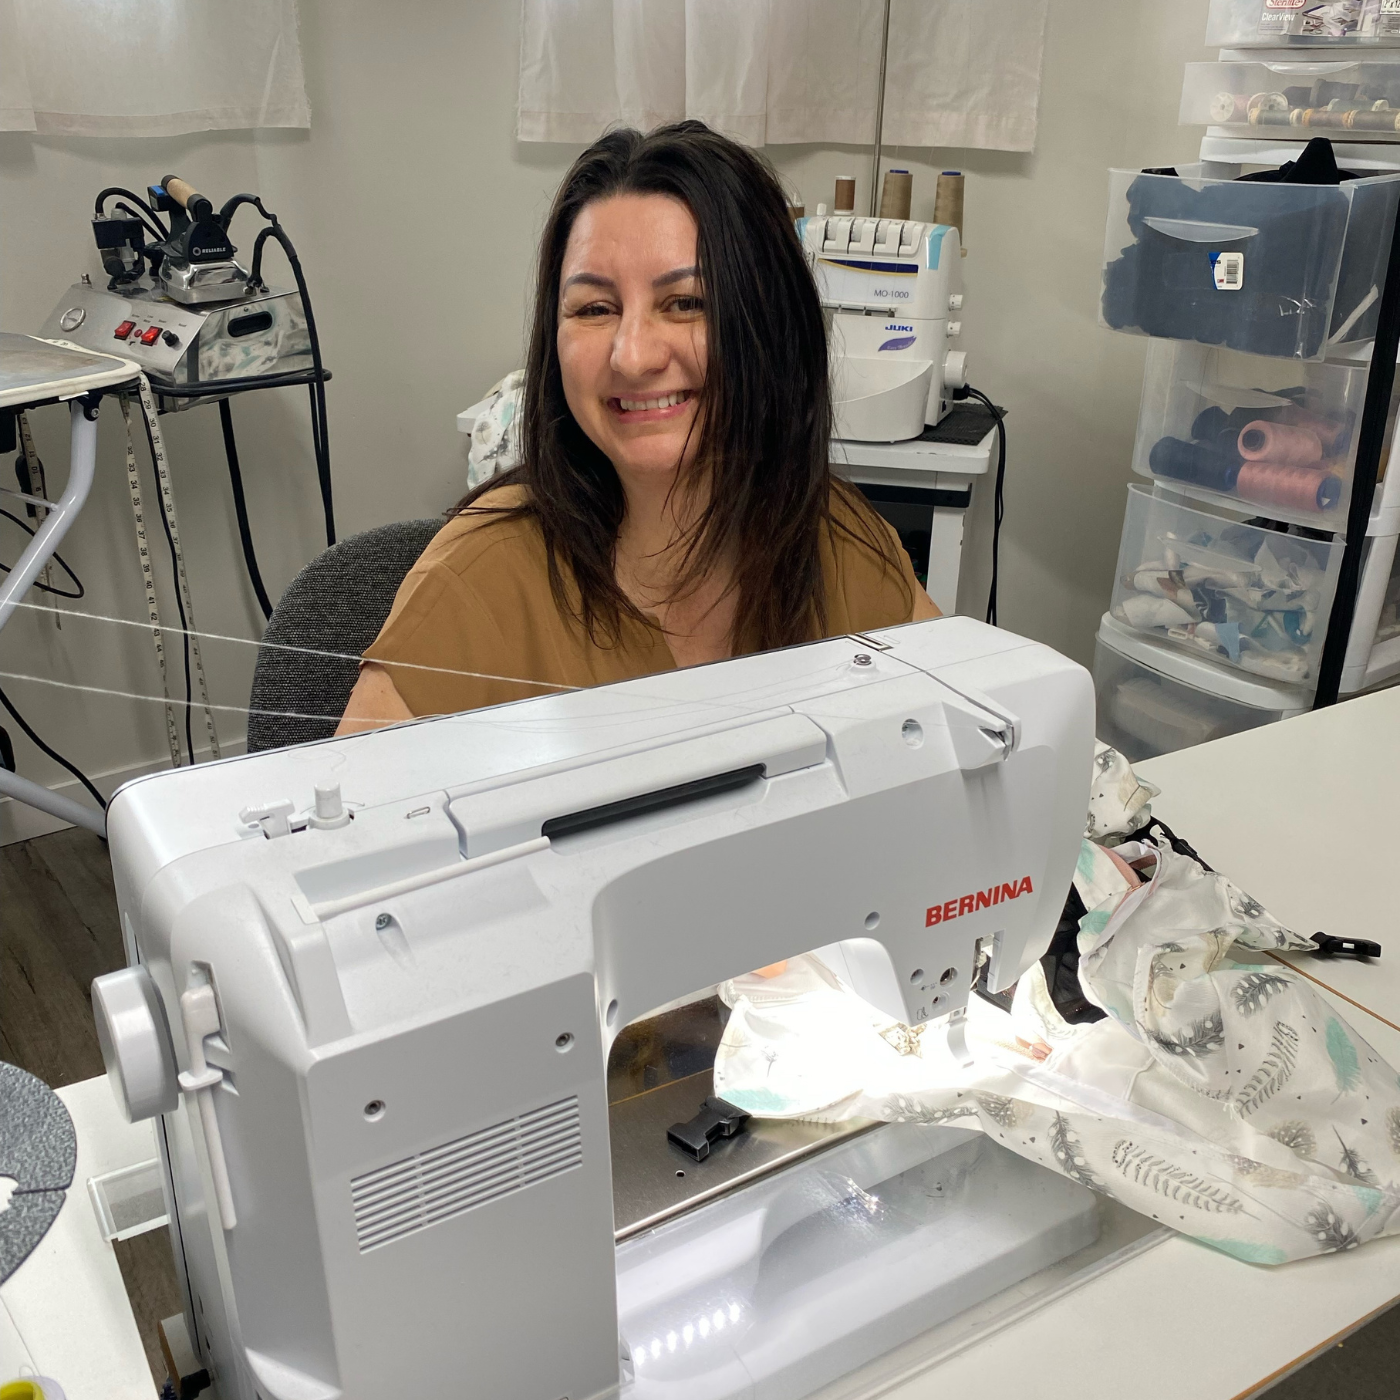 Elizabeth Waldner smiles at the camera from behind a sewing machine. White fabric with gray and mint leaves is on the table in front of the sewing machine.